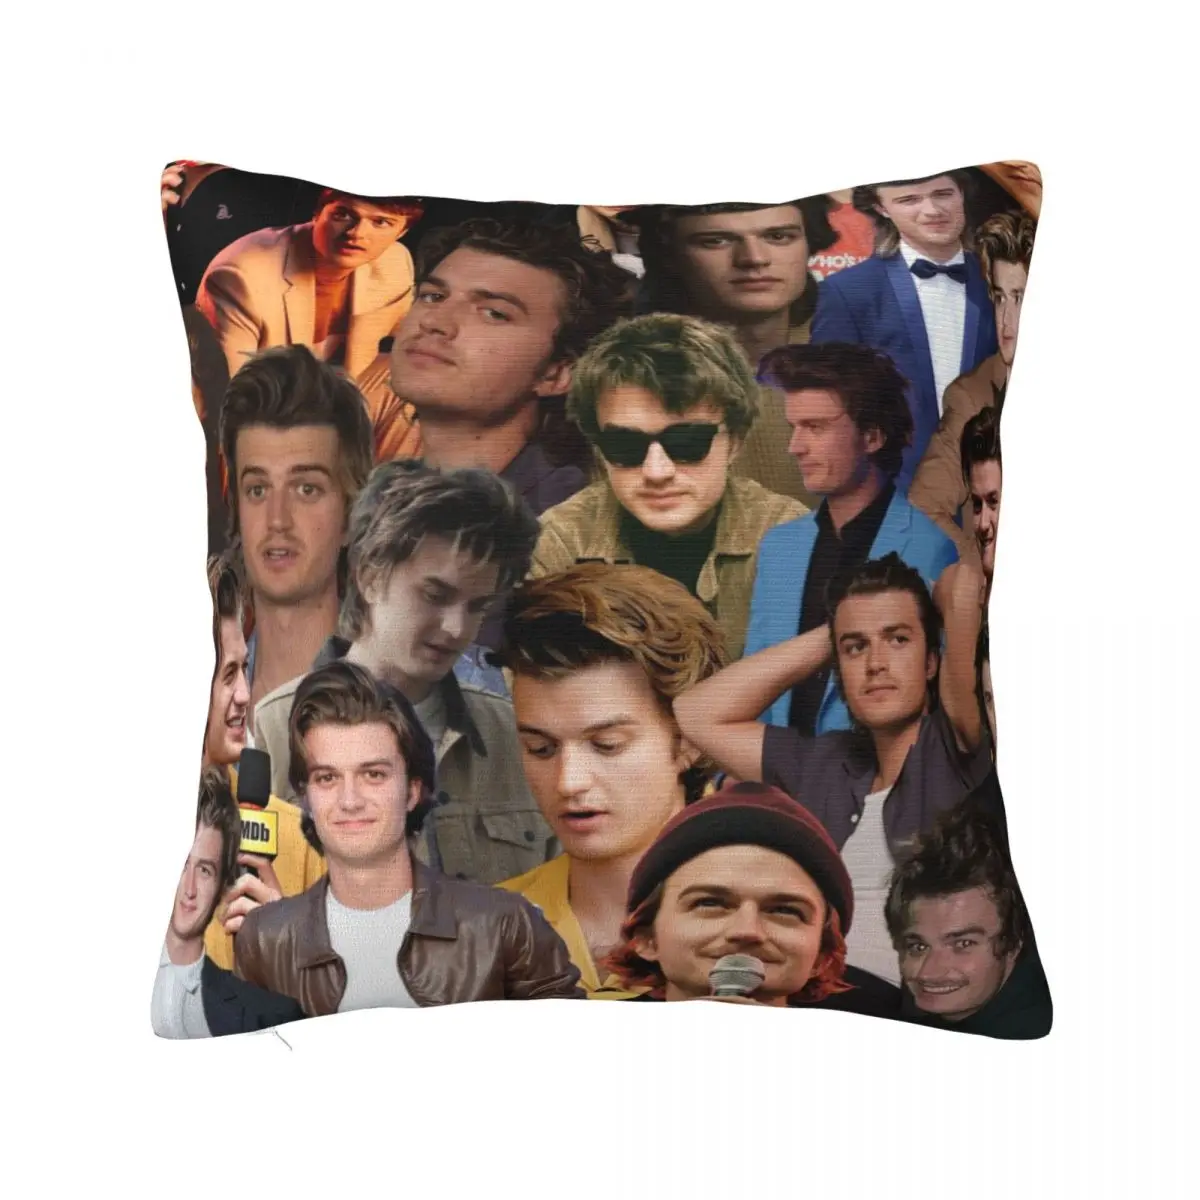 

Joe Keery Photo Collage Pillowcase Soft Fabric Cushion Cover Decorations Throw Pillow Case Cover Home Square 45X45cm